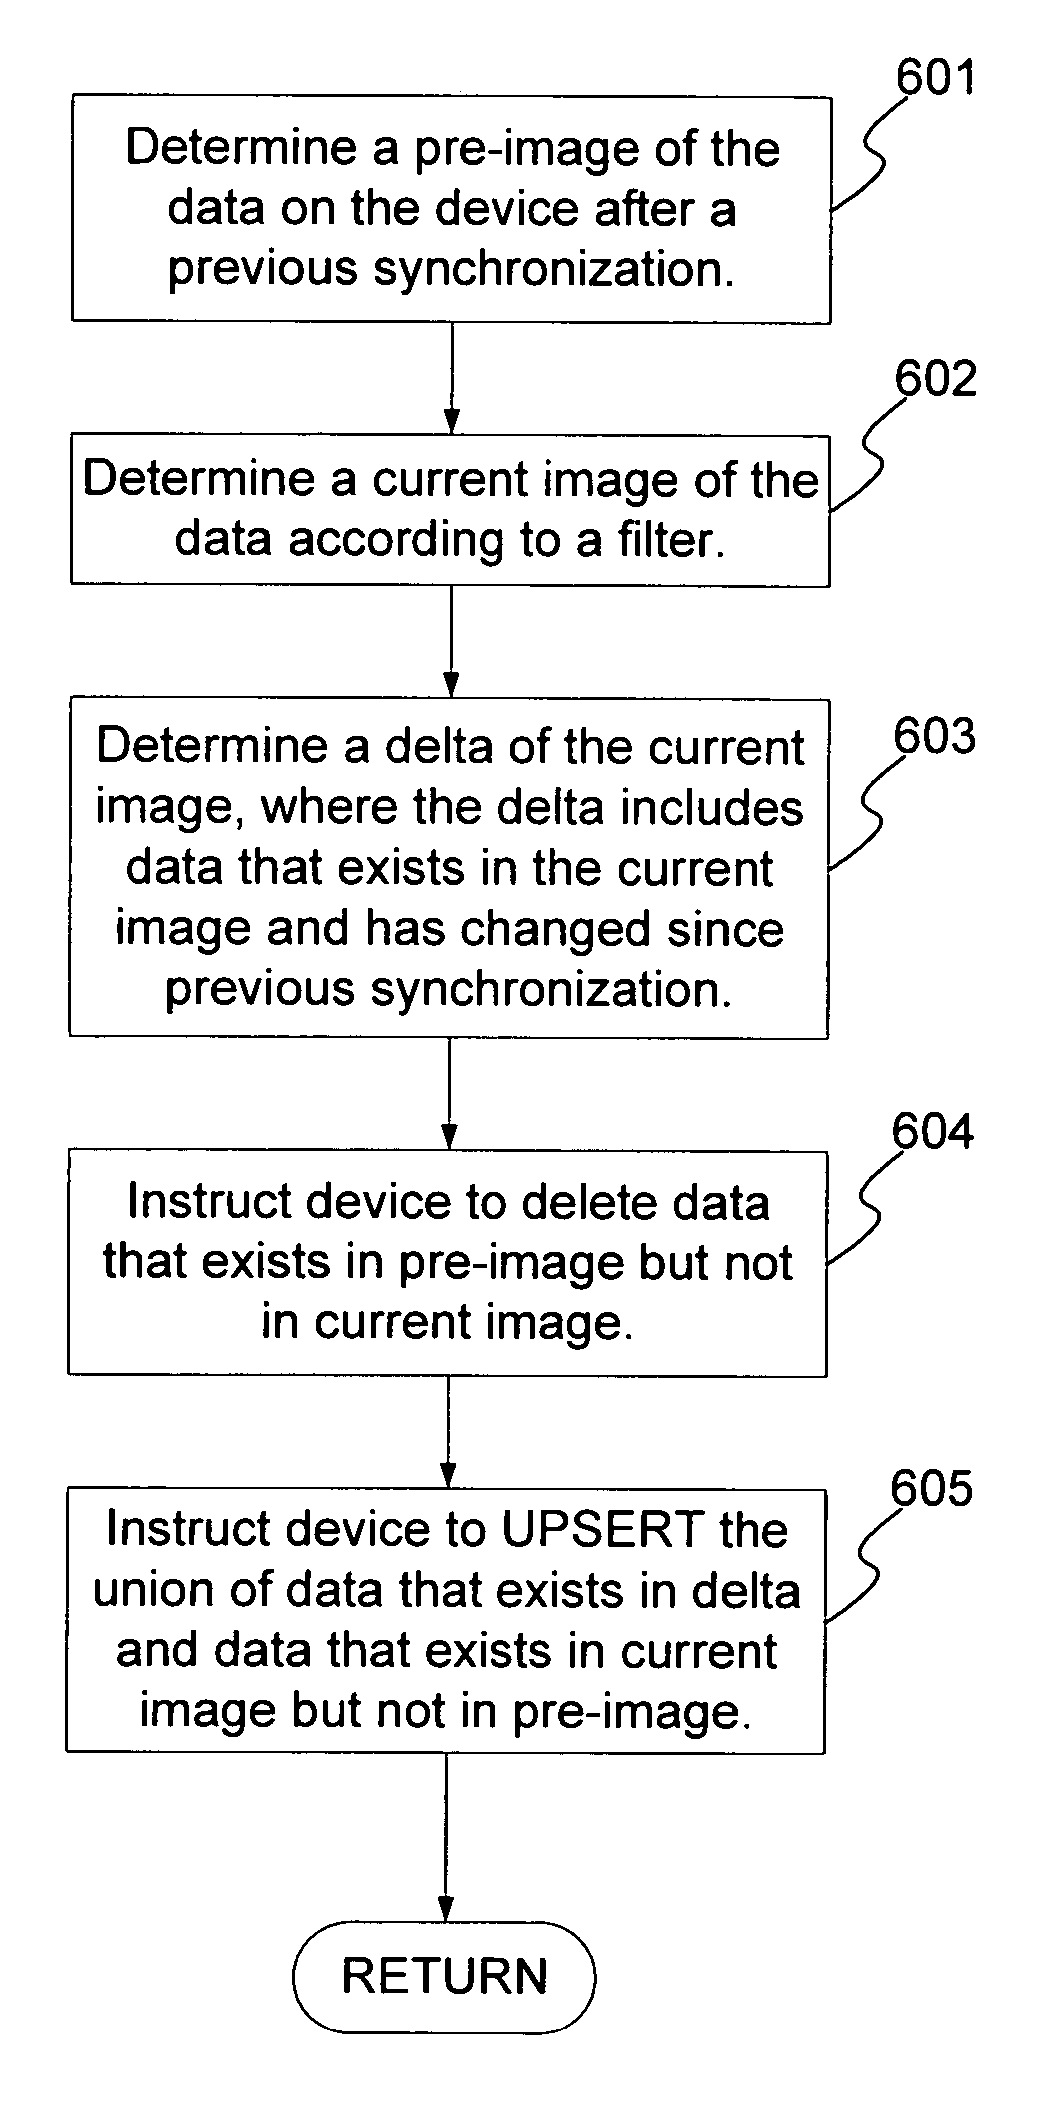 Incrementally sychronizing occasionally-connected mobile databases, preserving horizontal filter scope consistency by using client pre-image